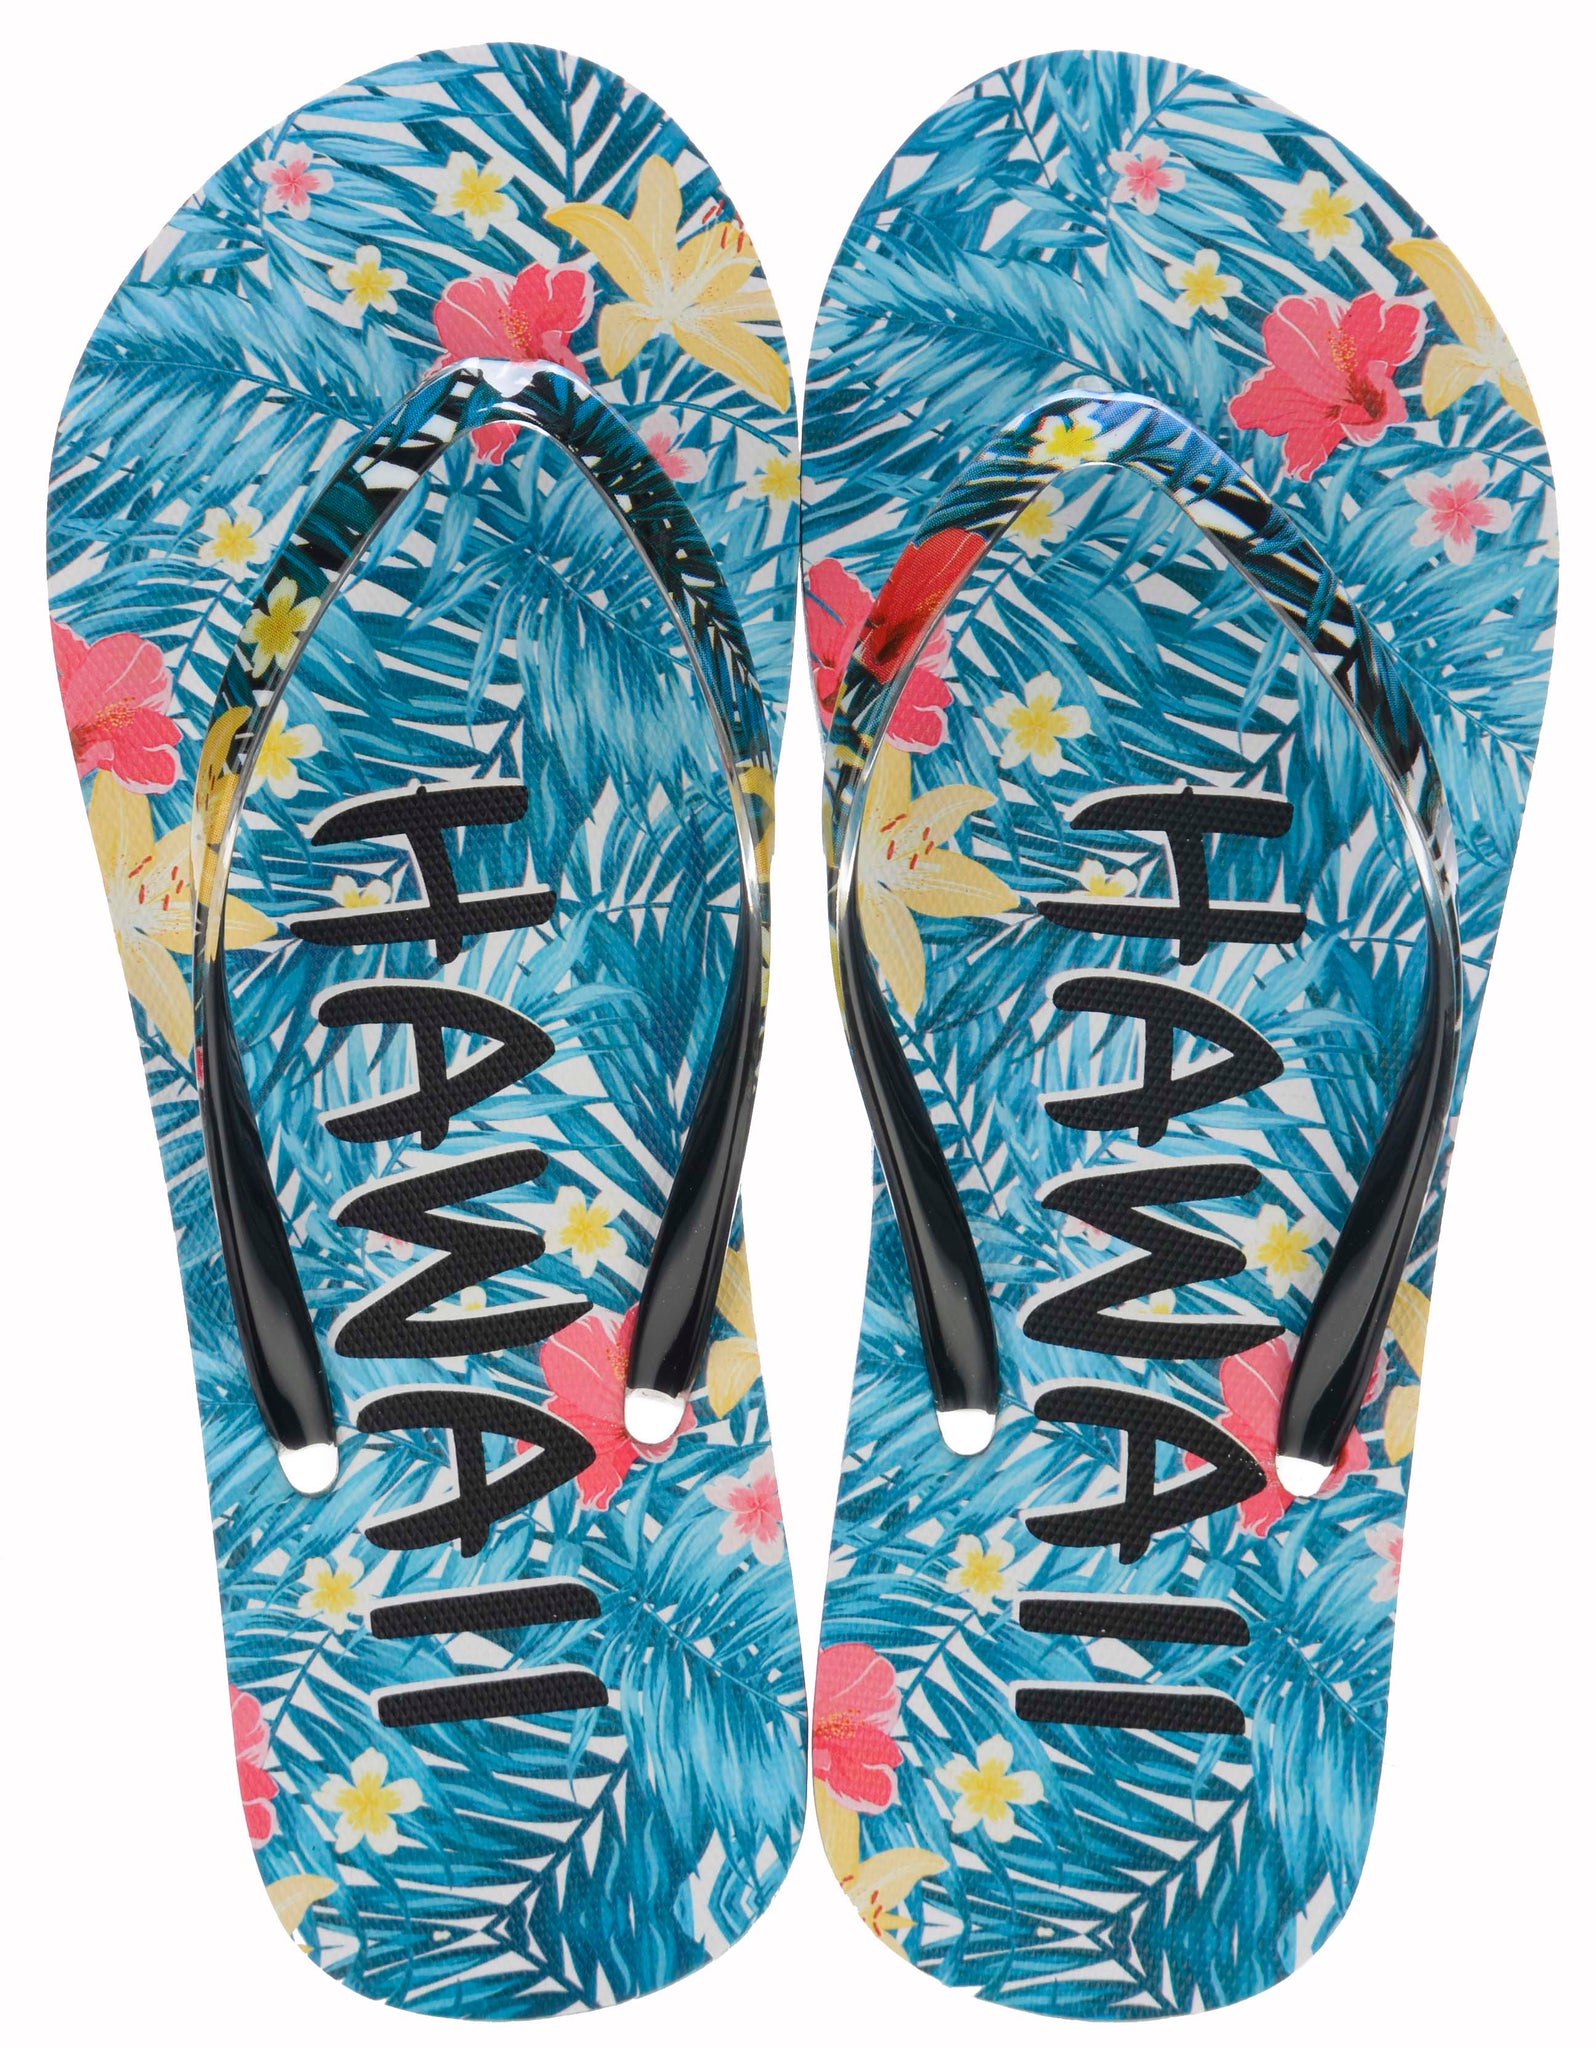 Hawaiian Breeze: The Comfy and Stylish Floral Flip Flops for